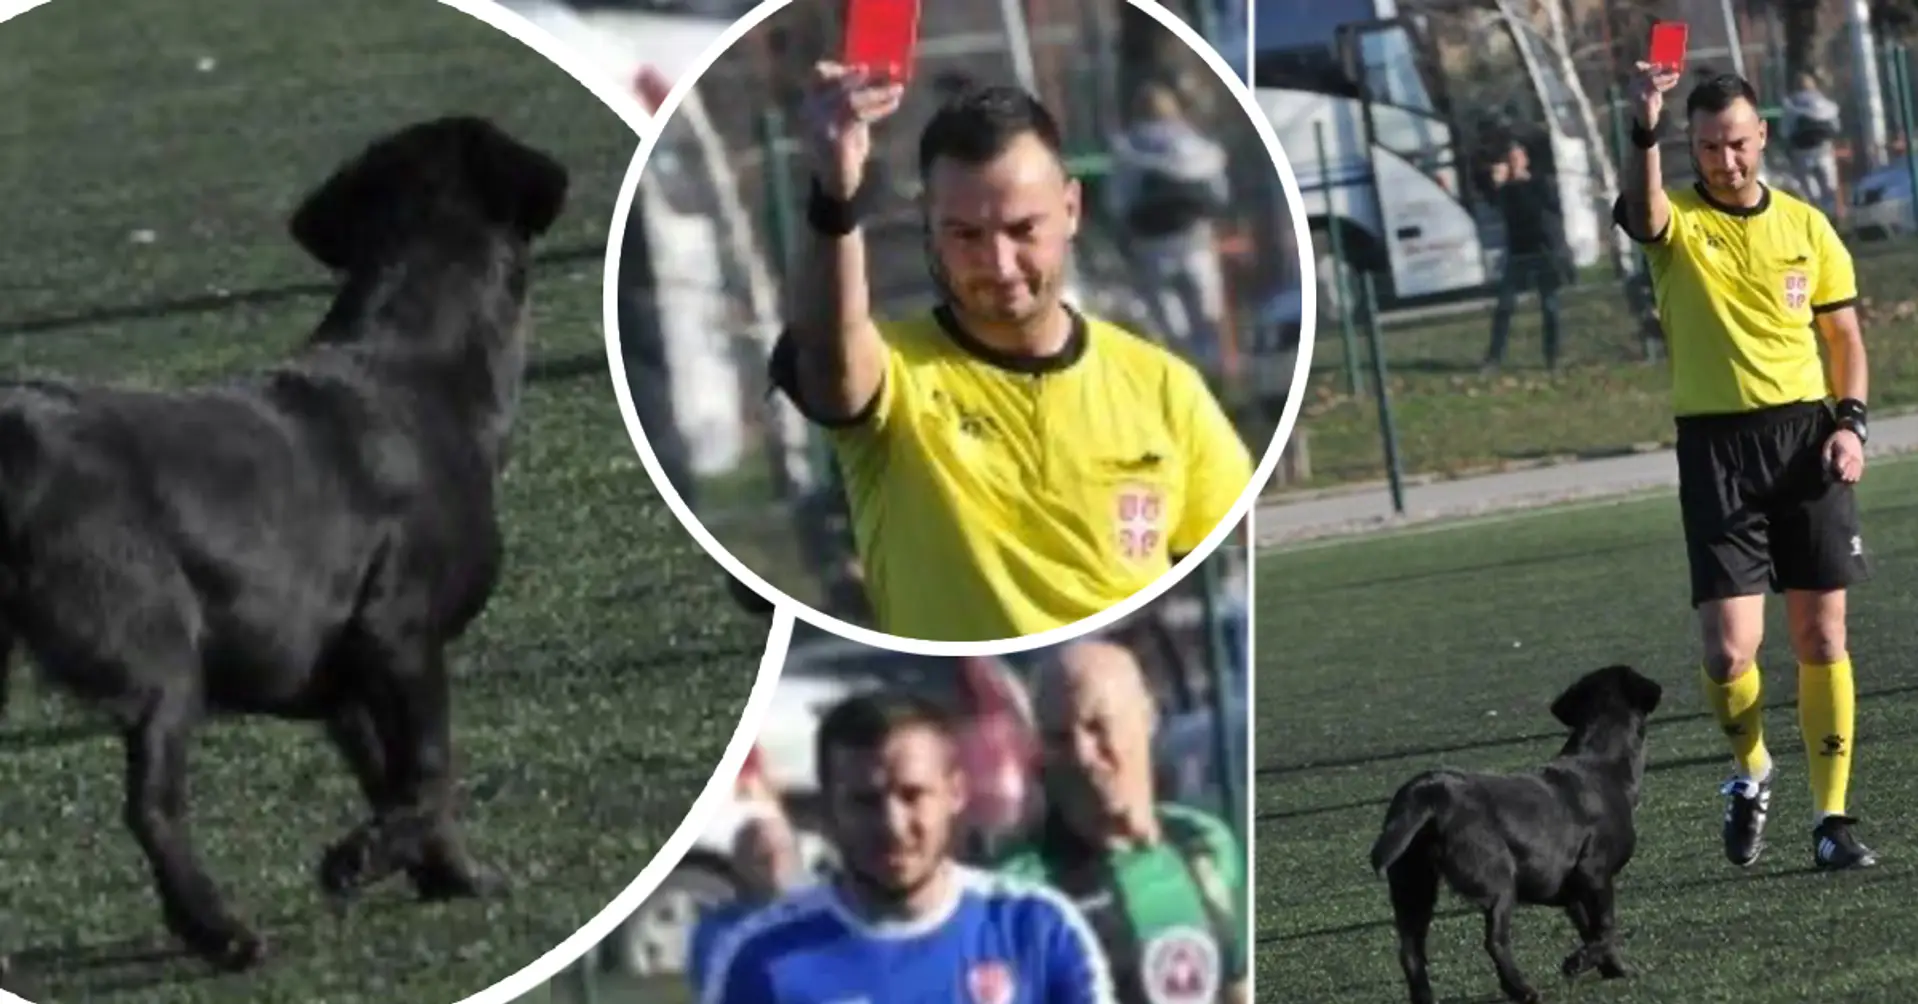 Serbian dog gets a red card for invading the pitch four times, refuses to leave, referee abandons match